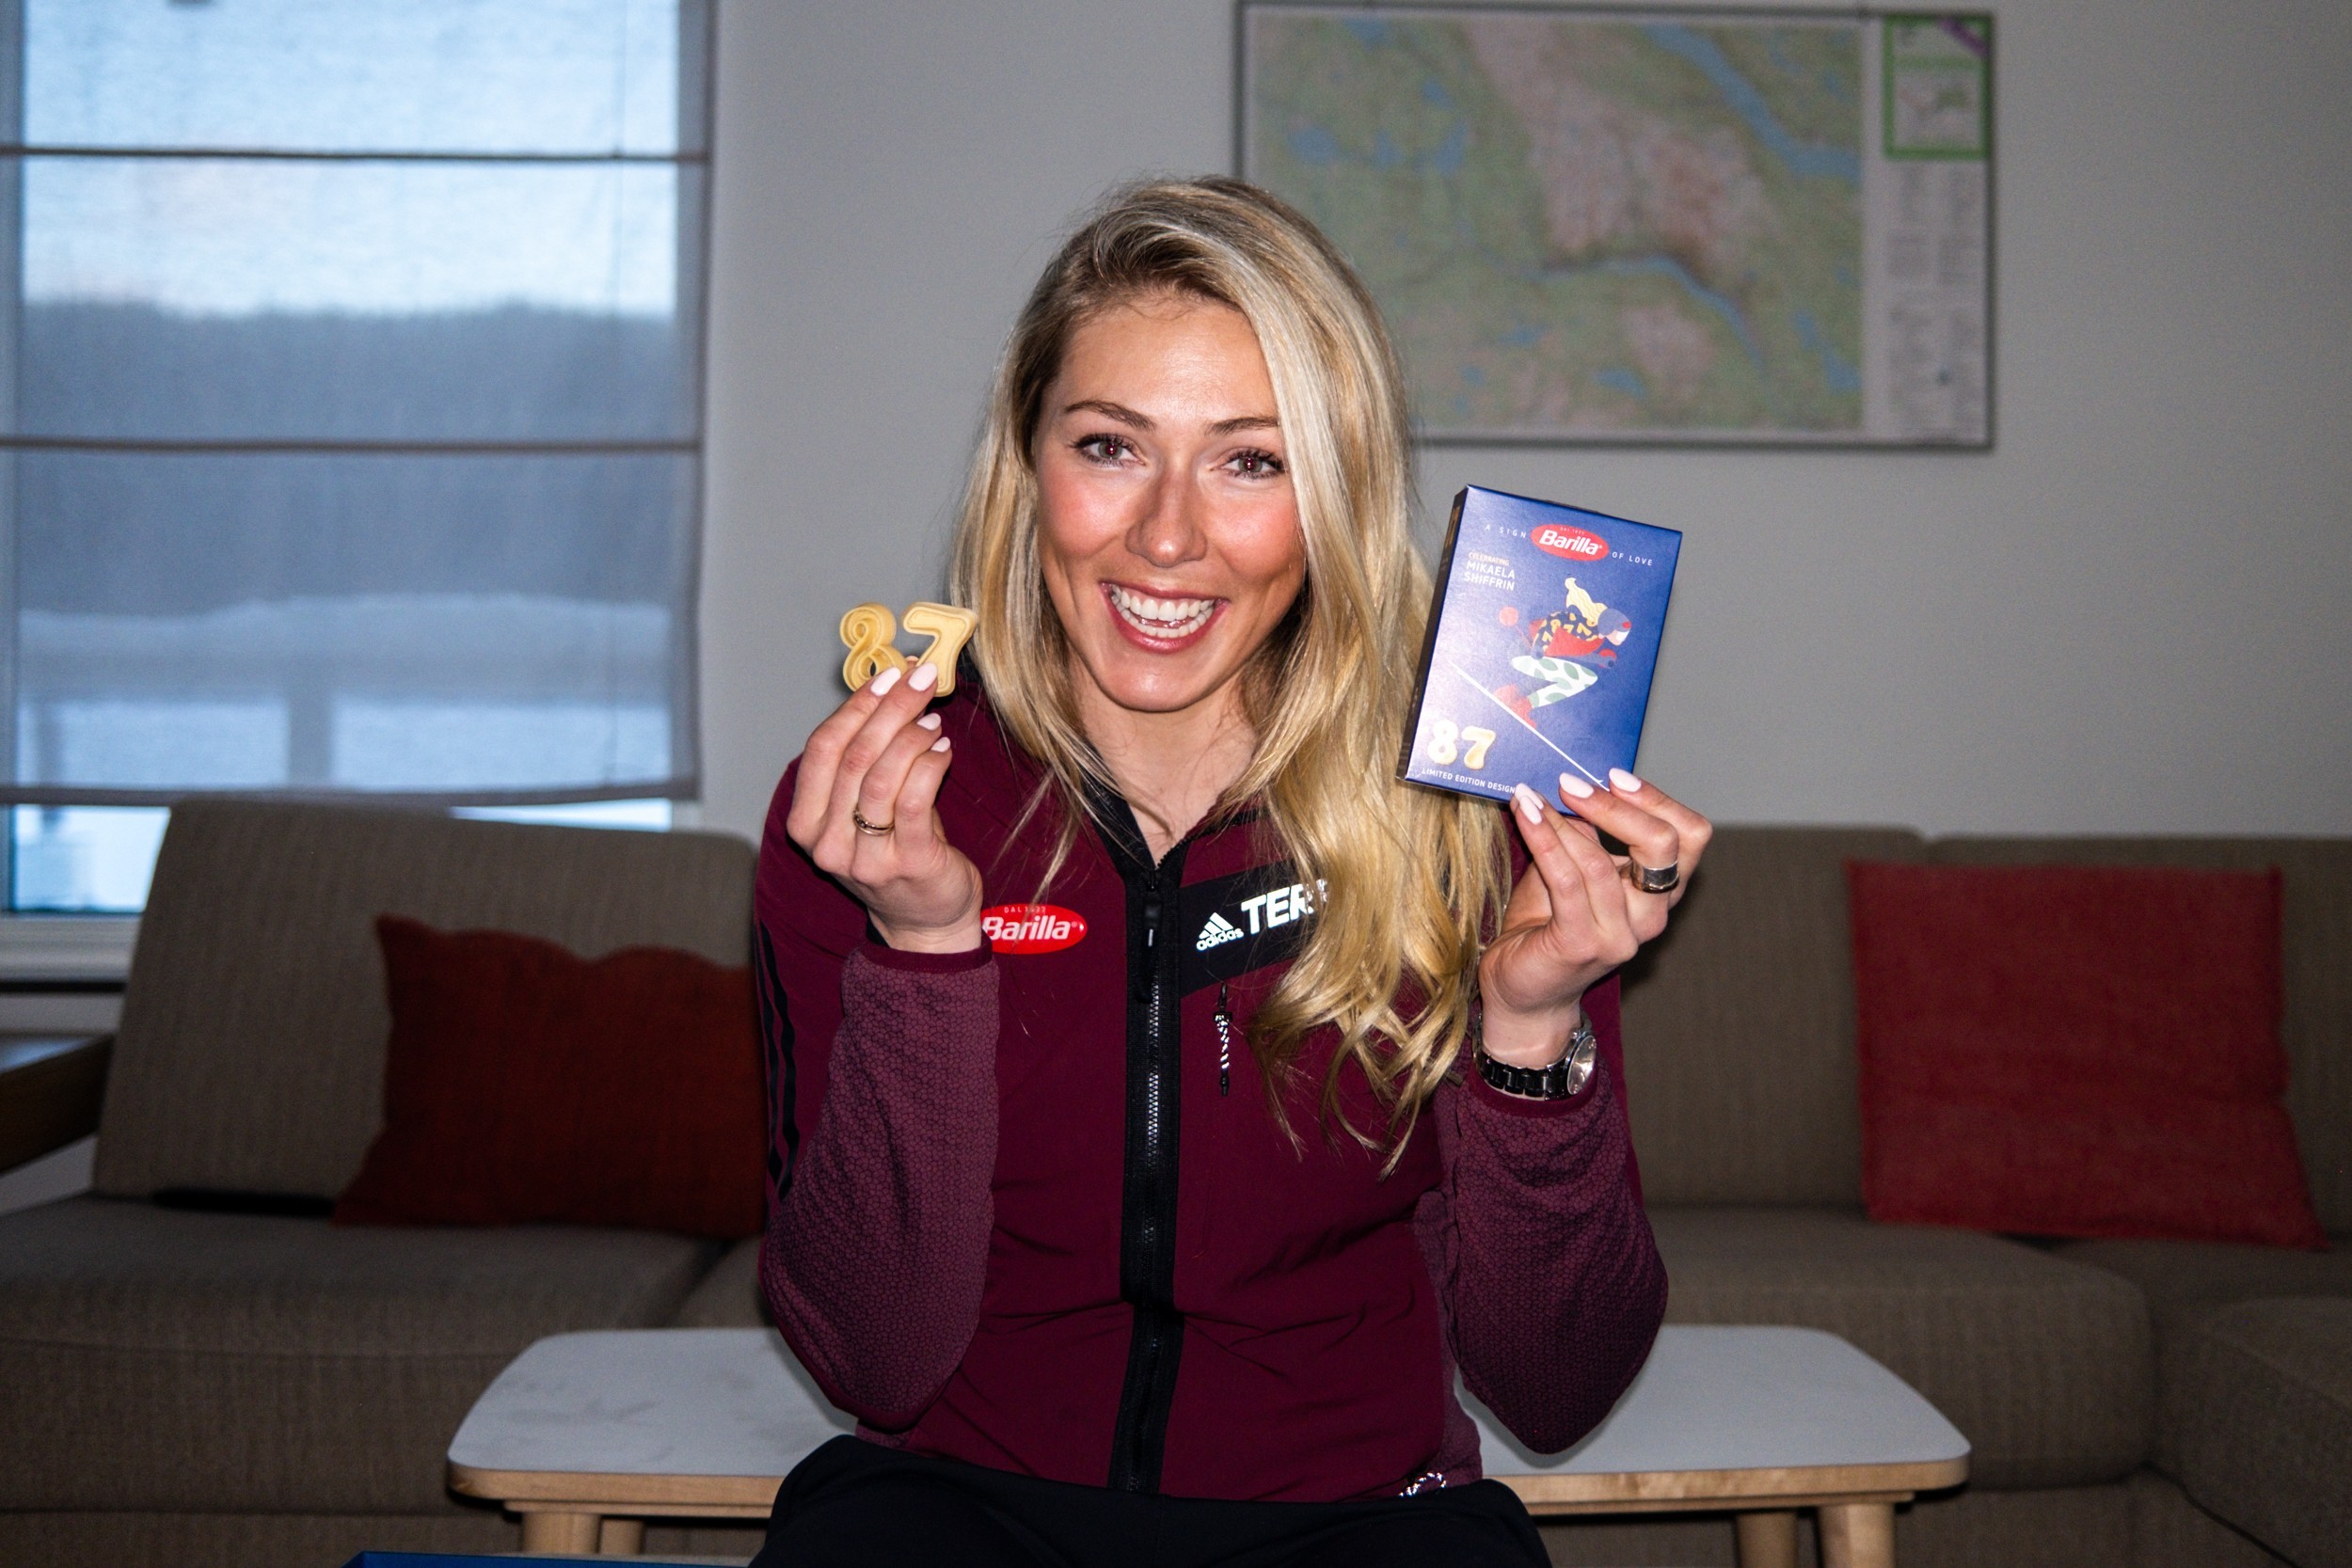 Barilla & Mikaela Shiffrin: Greatness starts with a great recipe - Pack No. 25 